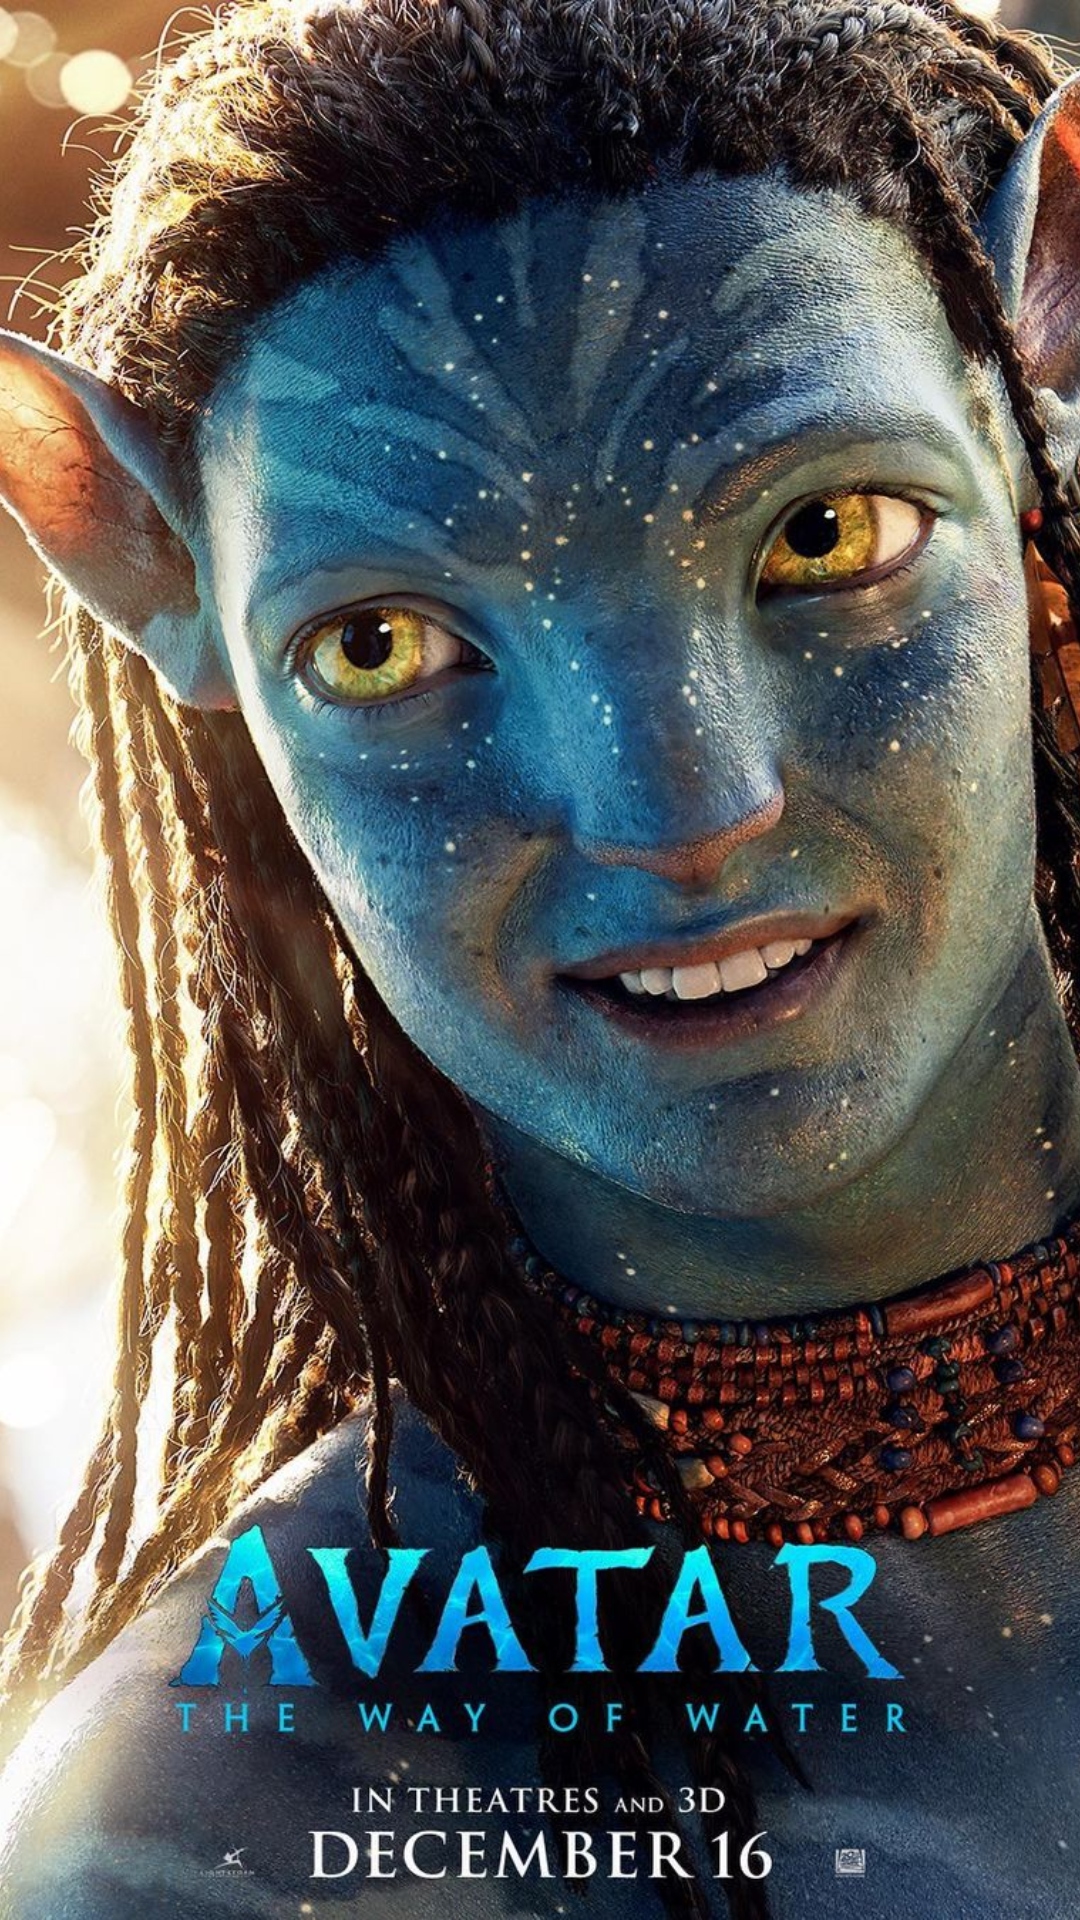 Avatar enters alltime top 10 in domestic box office  AS USA